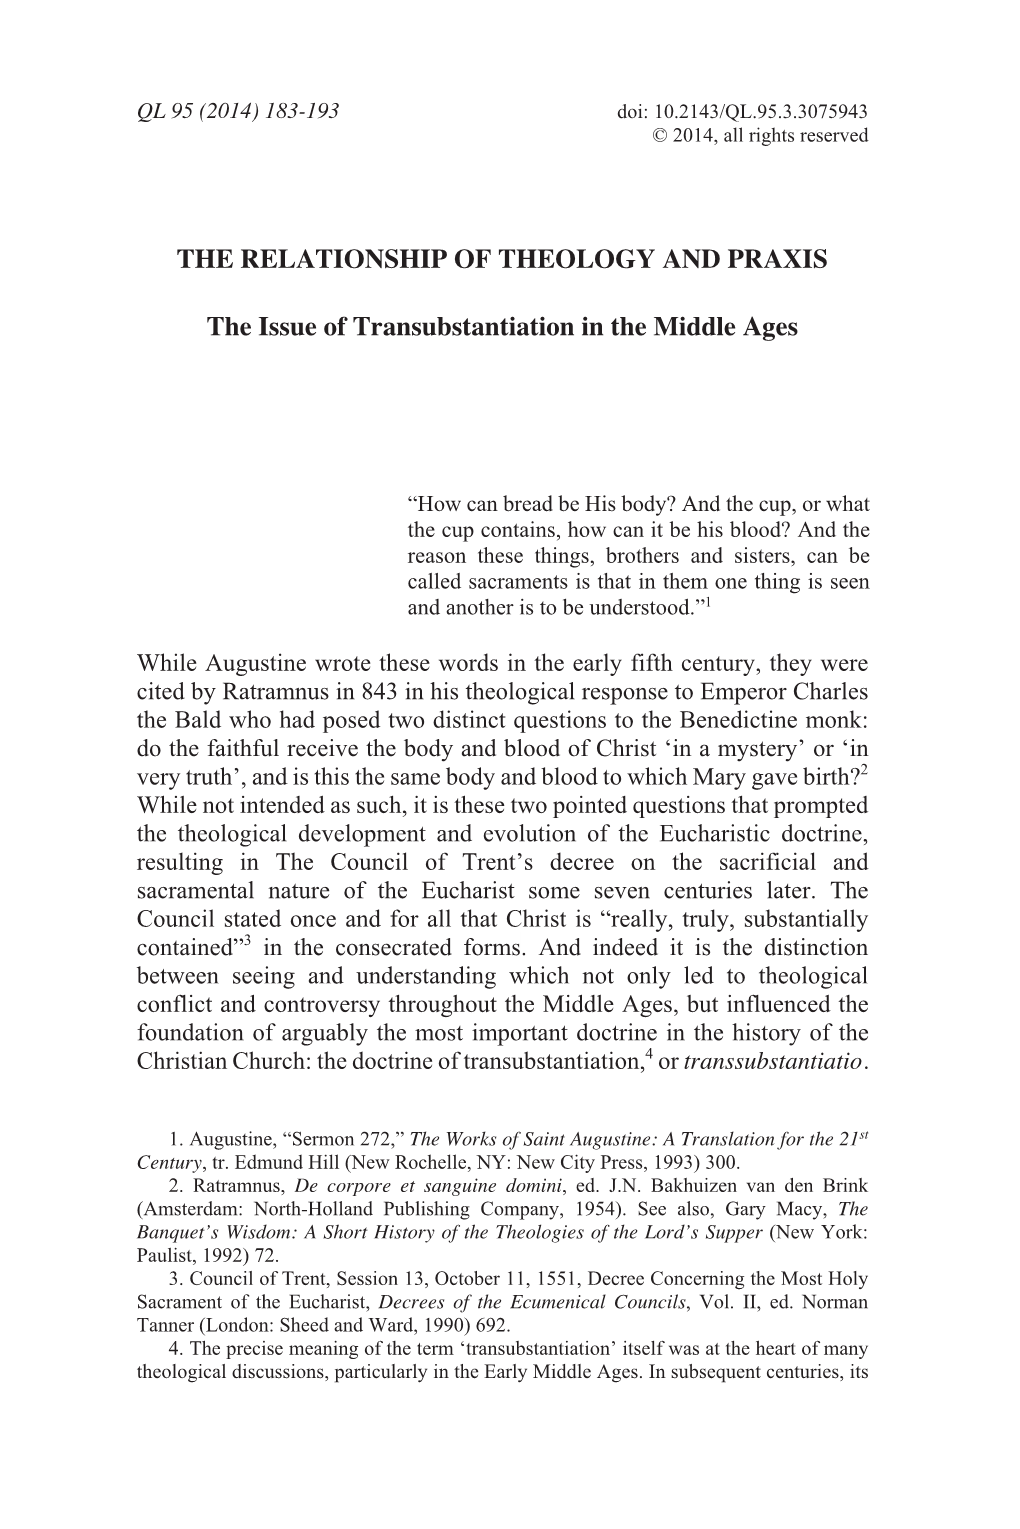 THE RELATIONSHIP of THEOLOGY and PRAXIS the Issue of Transubstantiation in the Middle Ages